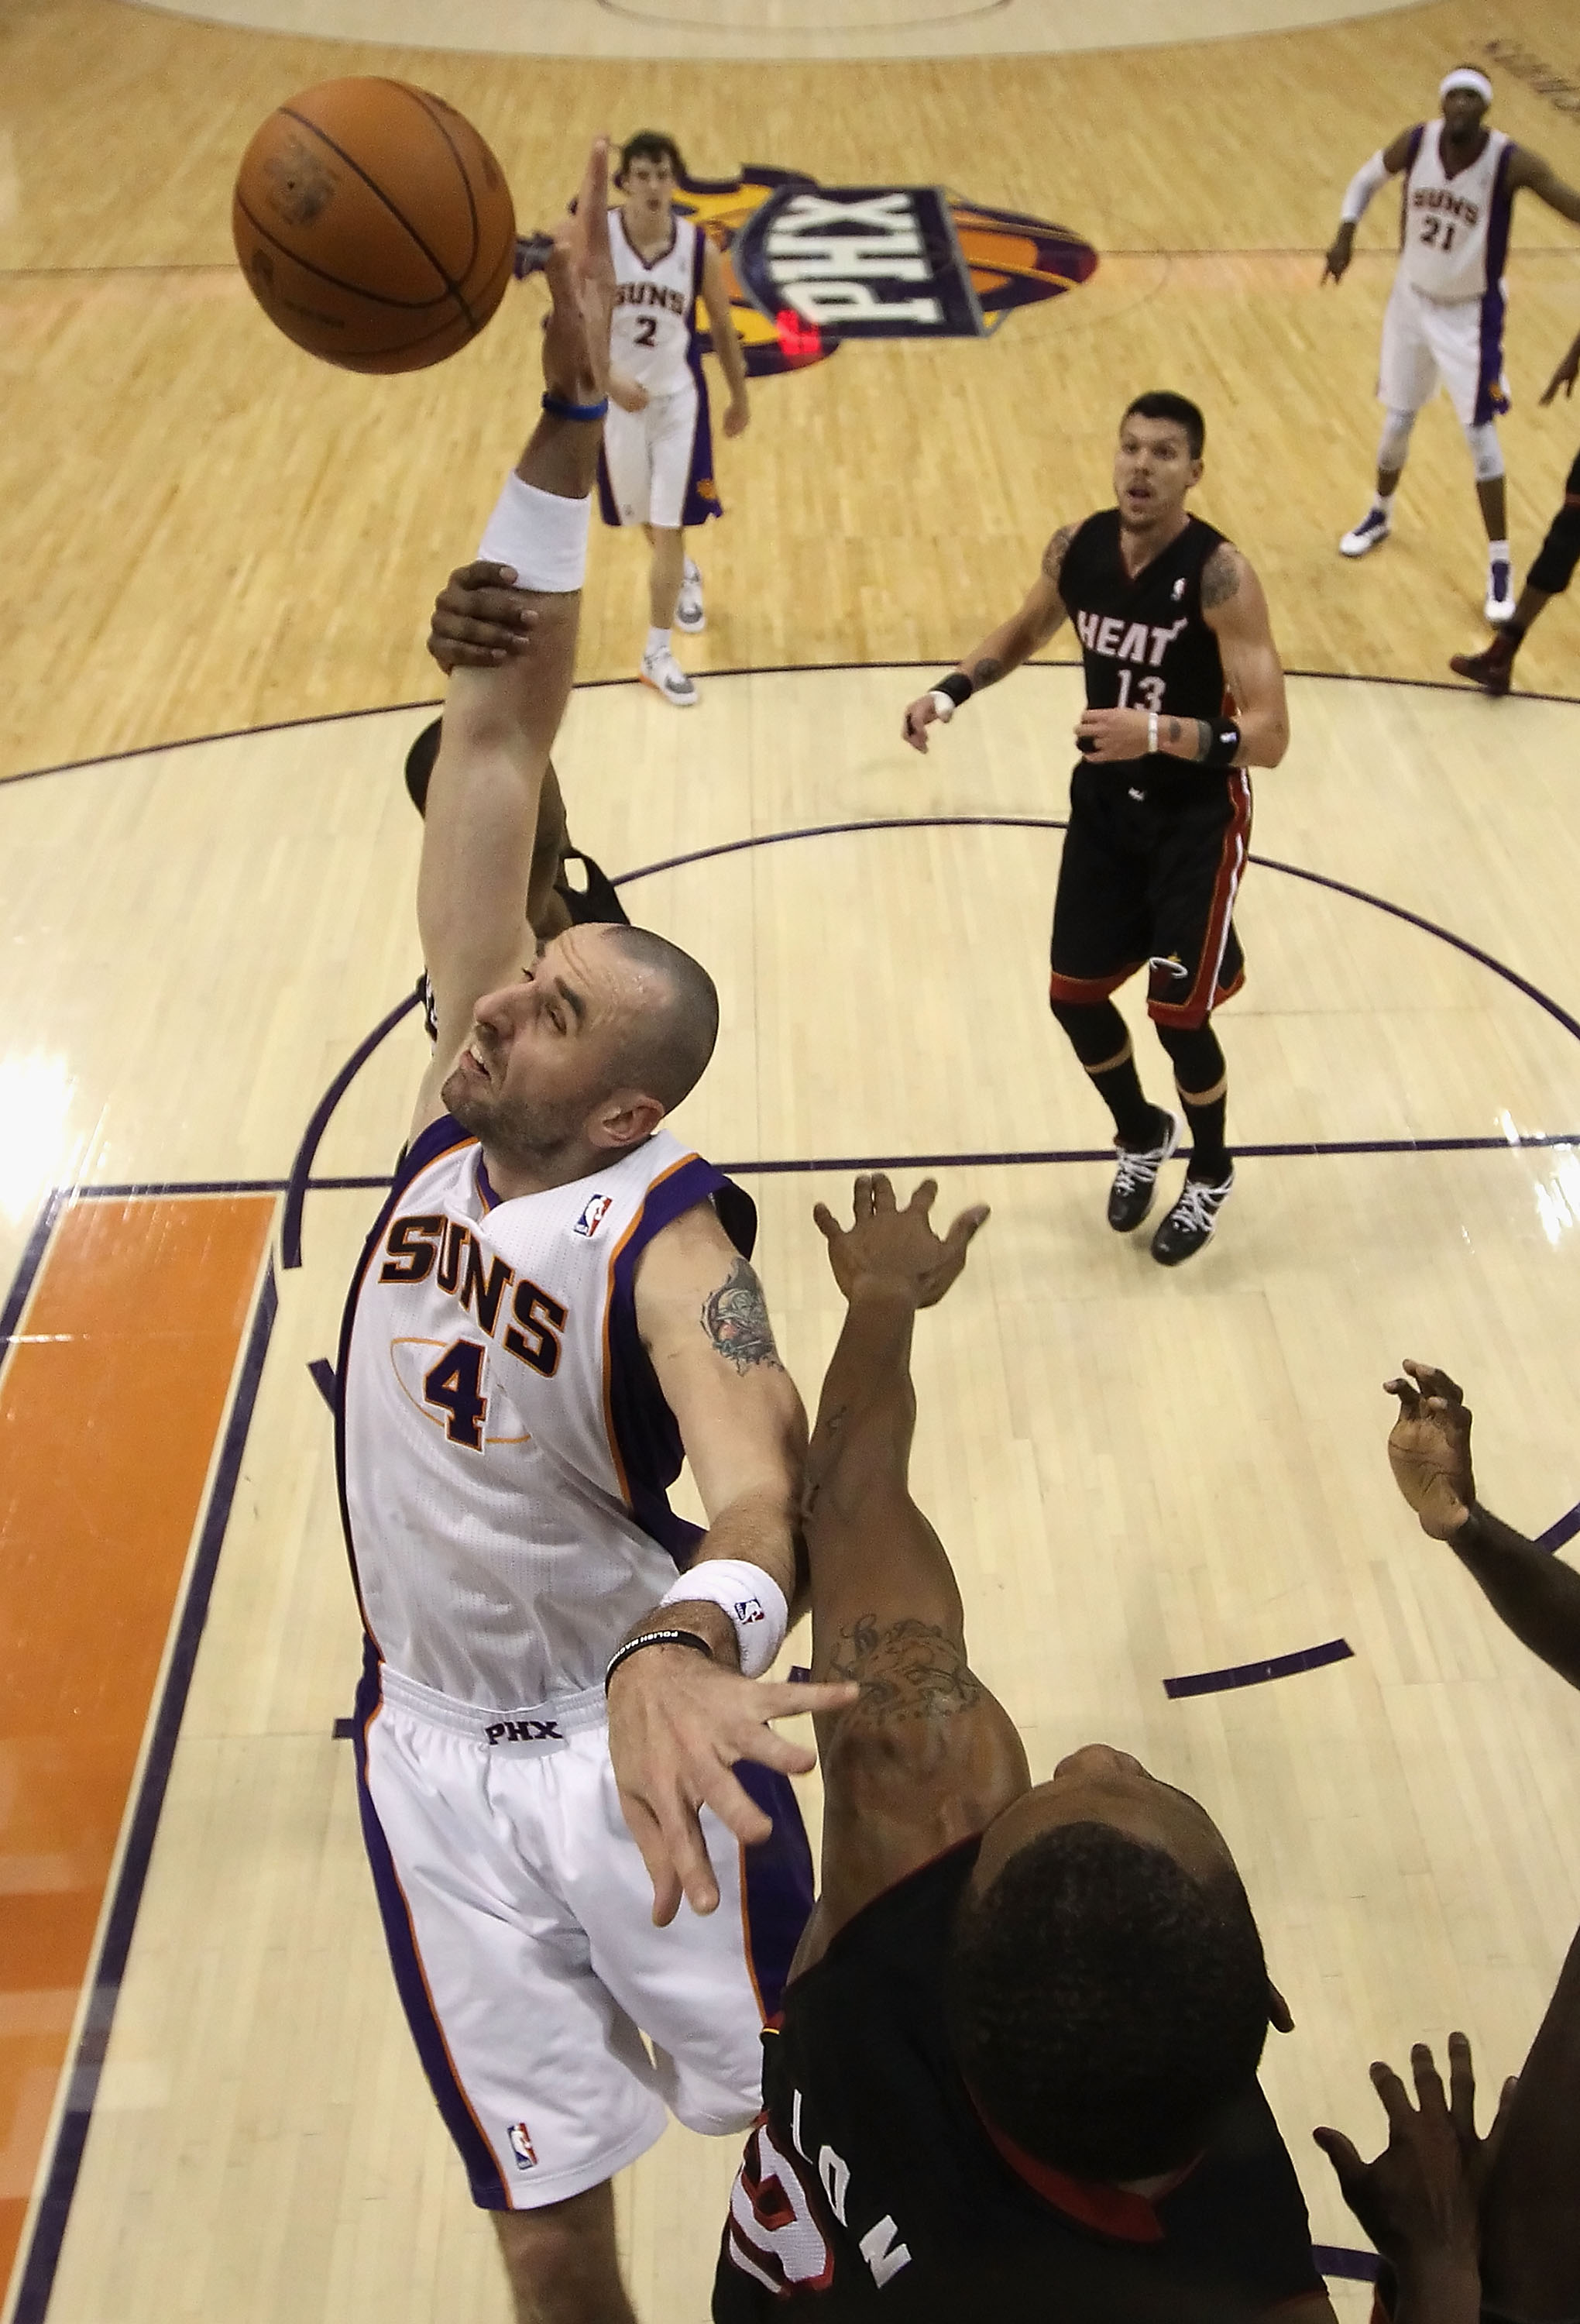 PHOENIX - DECEMBER 23:  Marcin Gortat #4 of the Phoenix Suns jumps for a rebound during the NBA game against the Miami Heat at US Airways Center on December 23, 2010 in Phoenix, Arizona. The Heat defeated the Suns 95-83.  NOTE TO USER: User expressly ackn